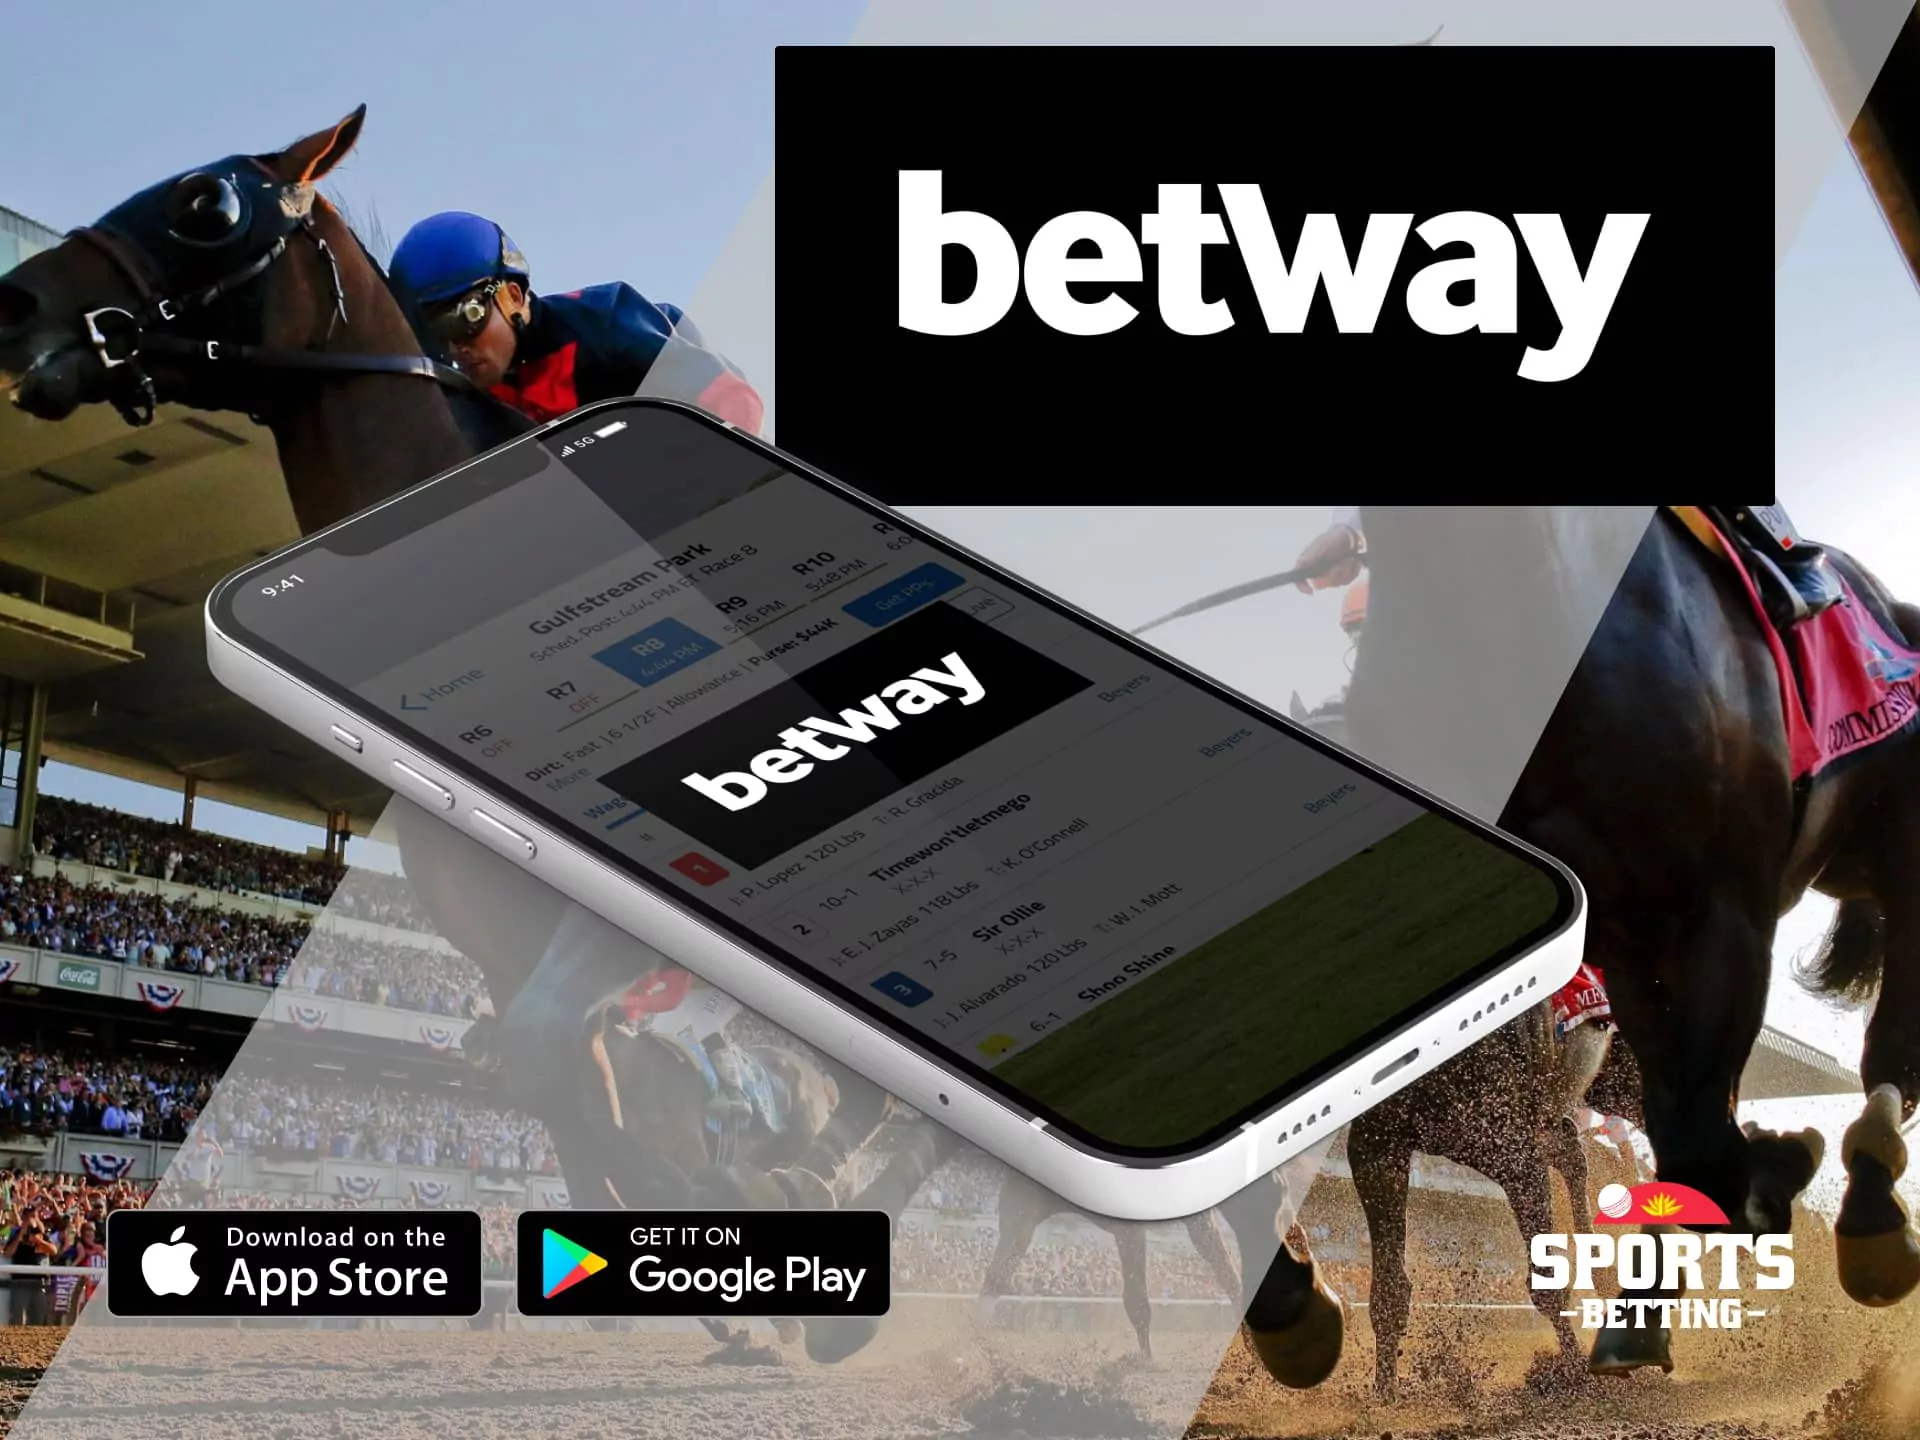 Betway horse racing betting site with its own blog on gaming events and tournaments.